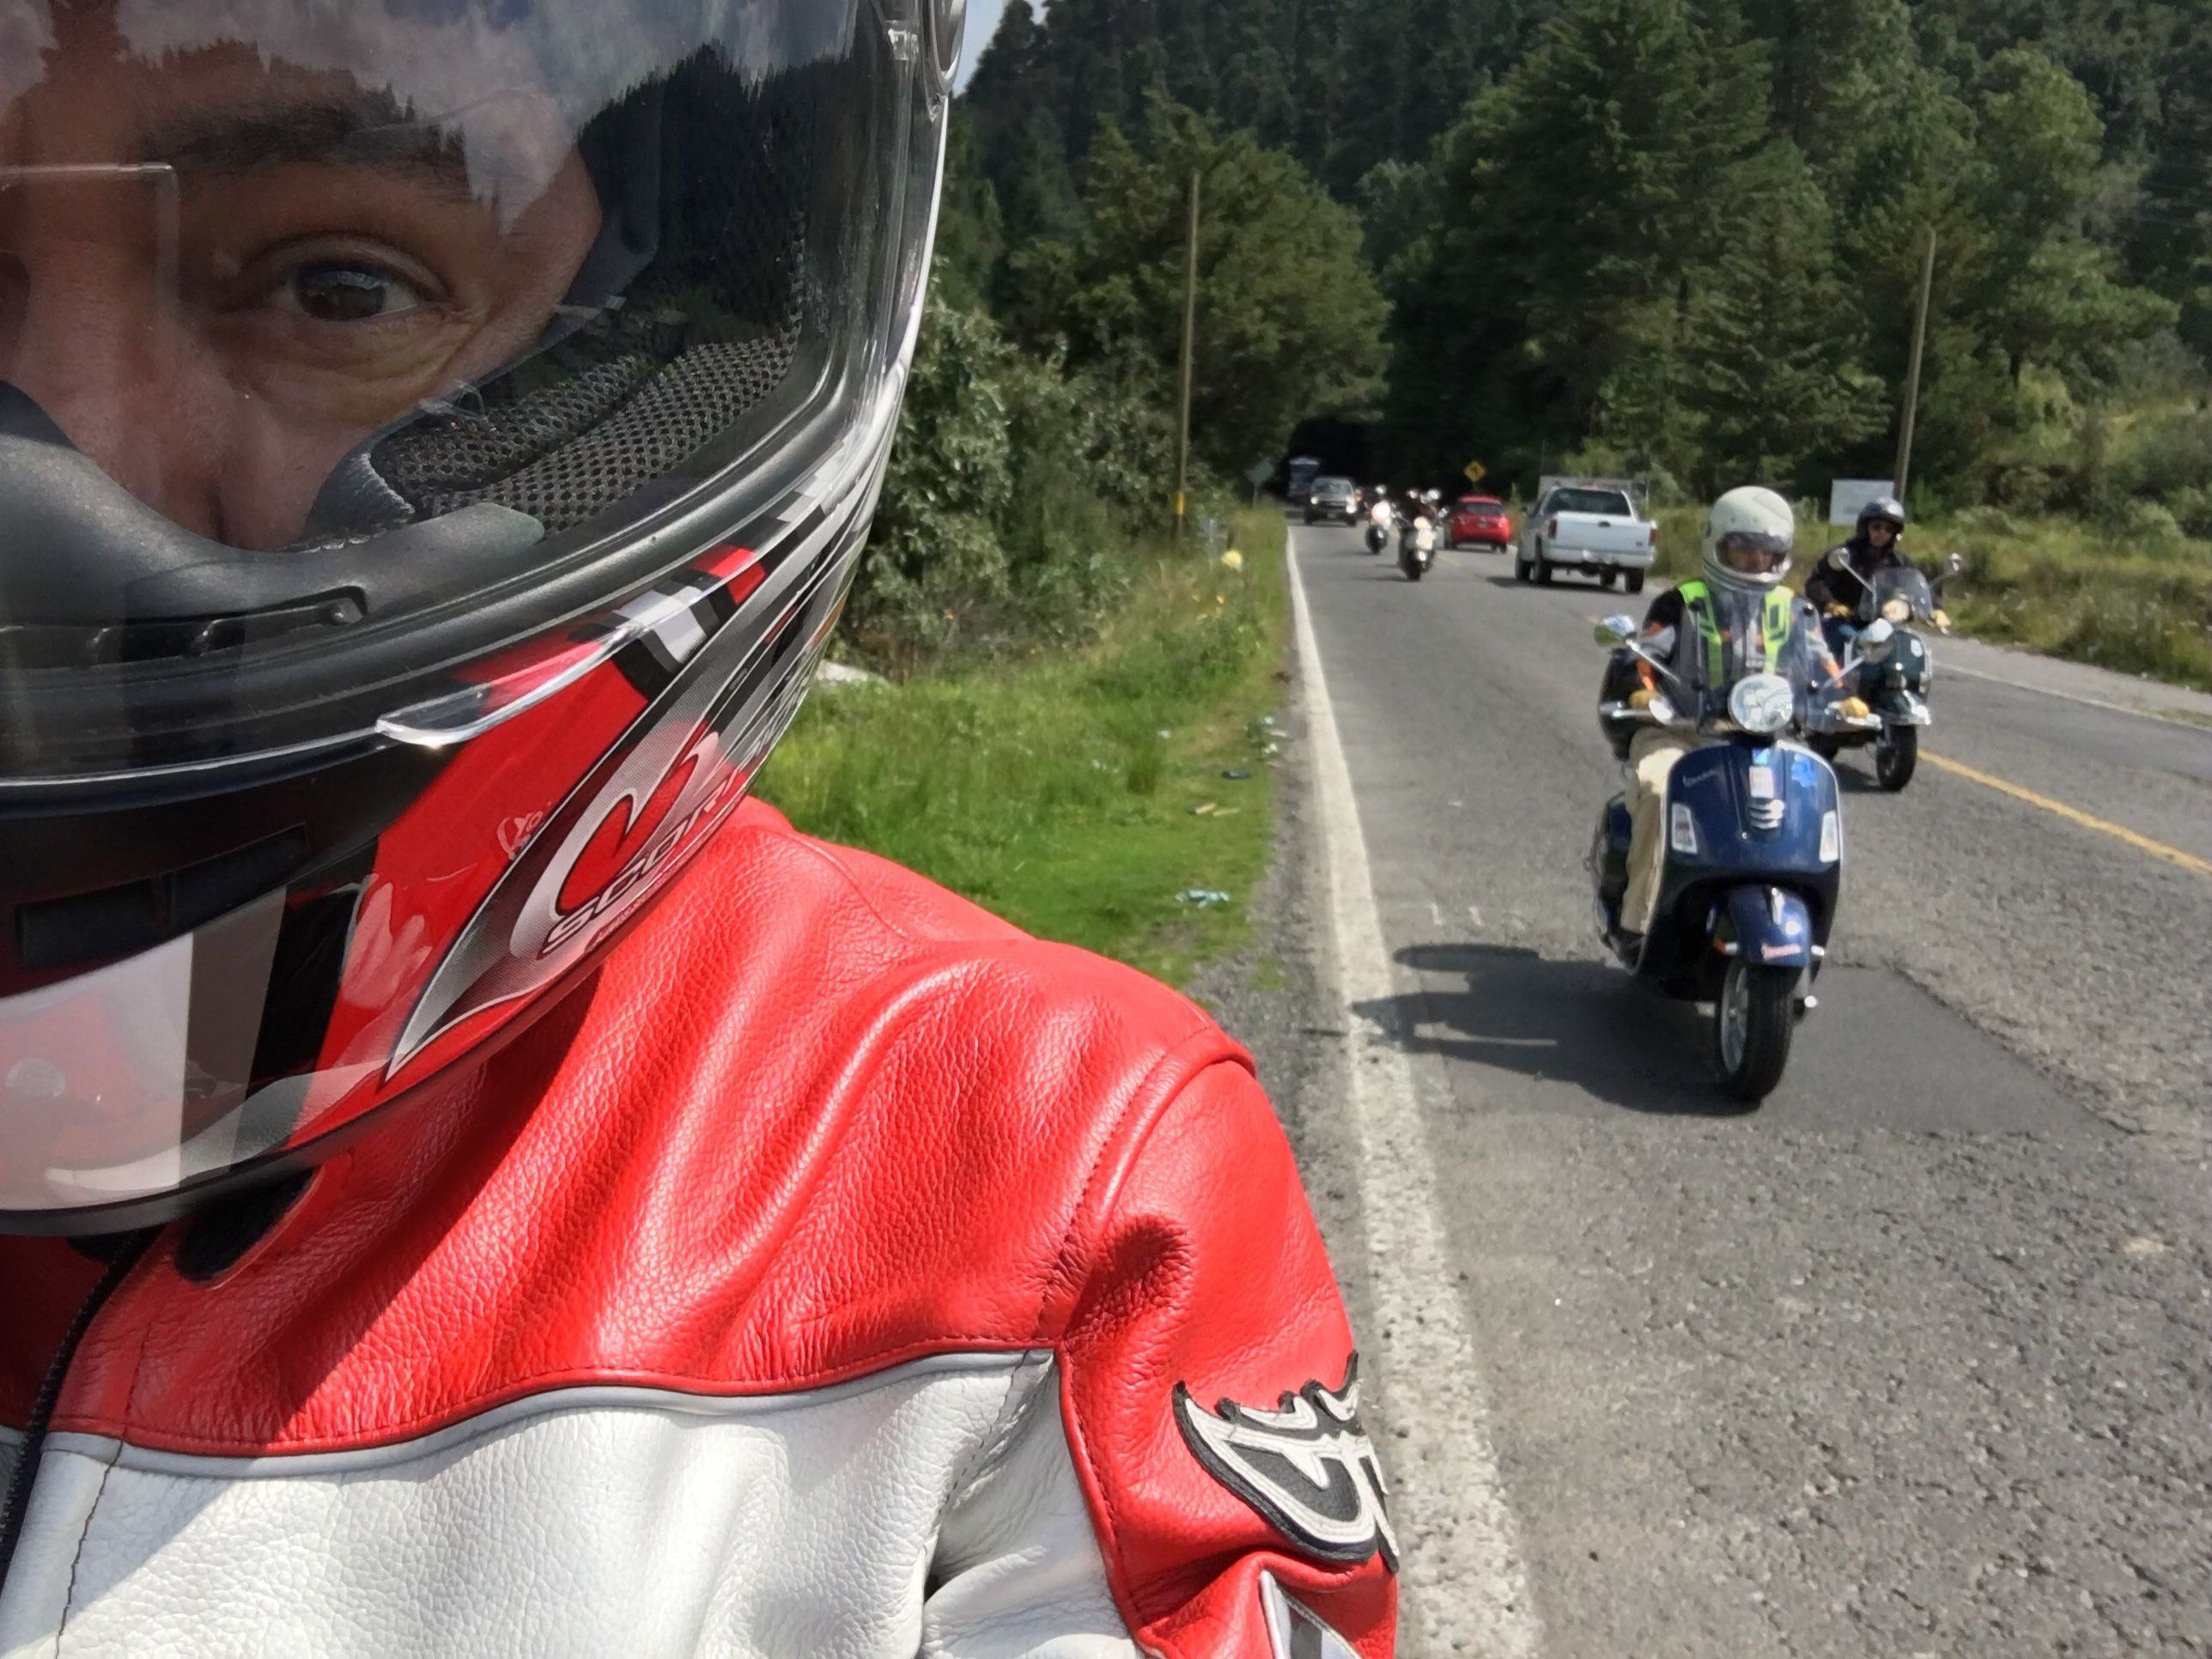 Ride longer today and passed a group of Vespacciani